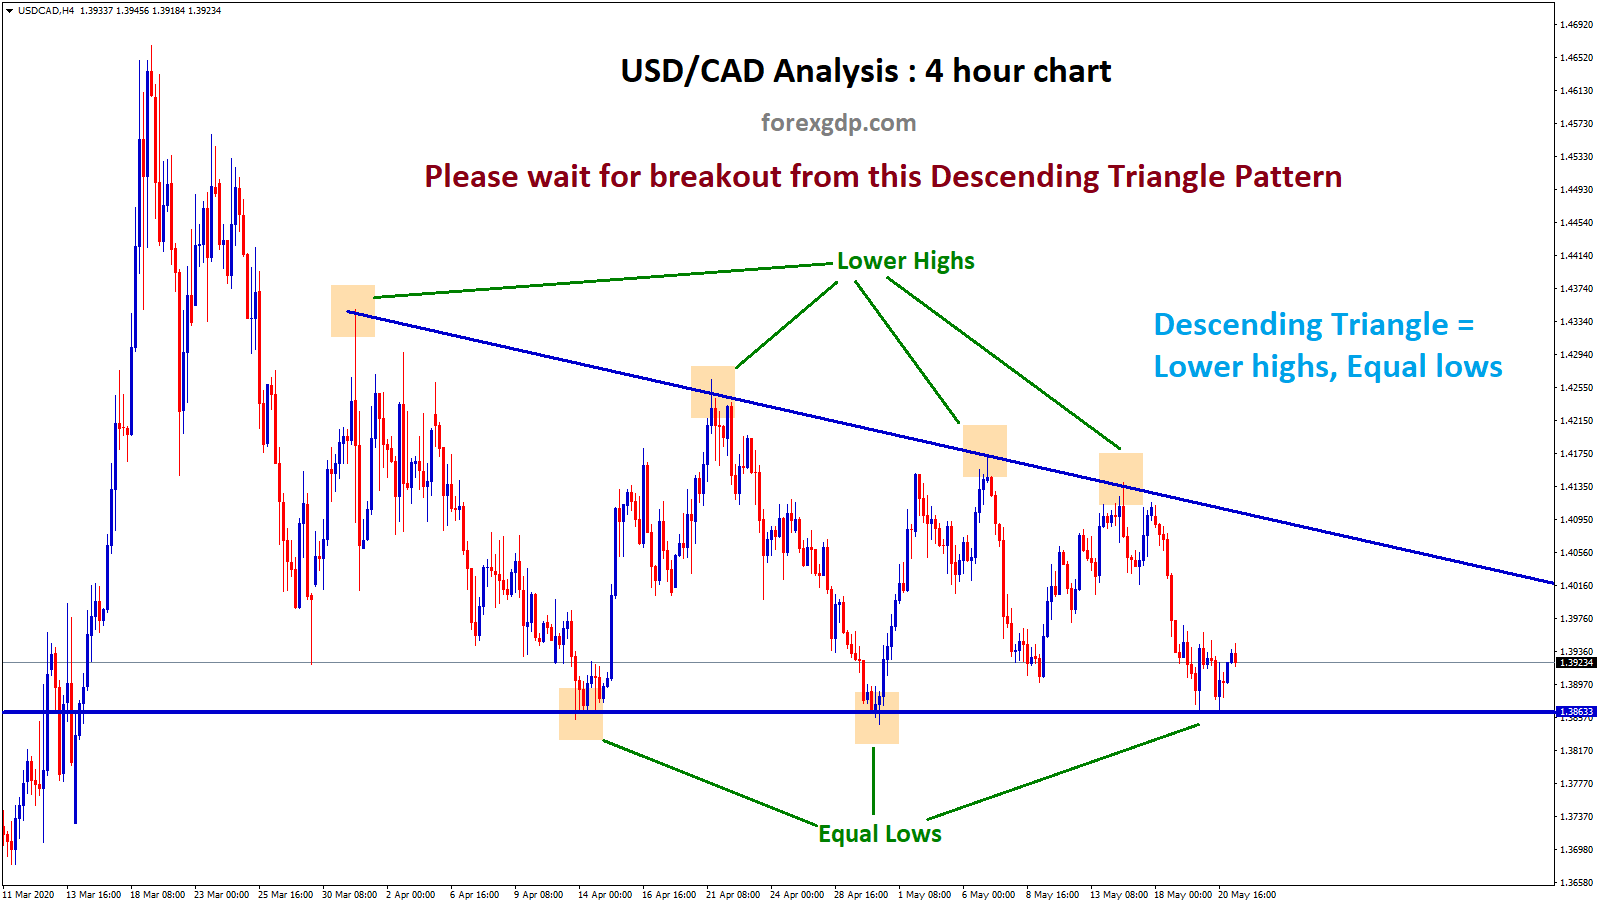 descending triangle forex chart pattern in usdcad